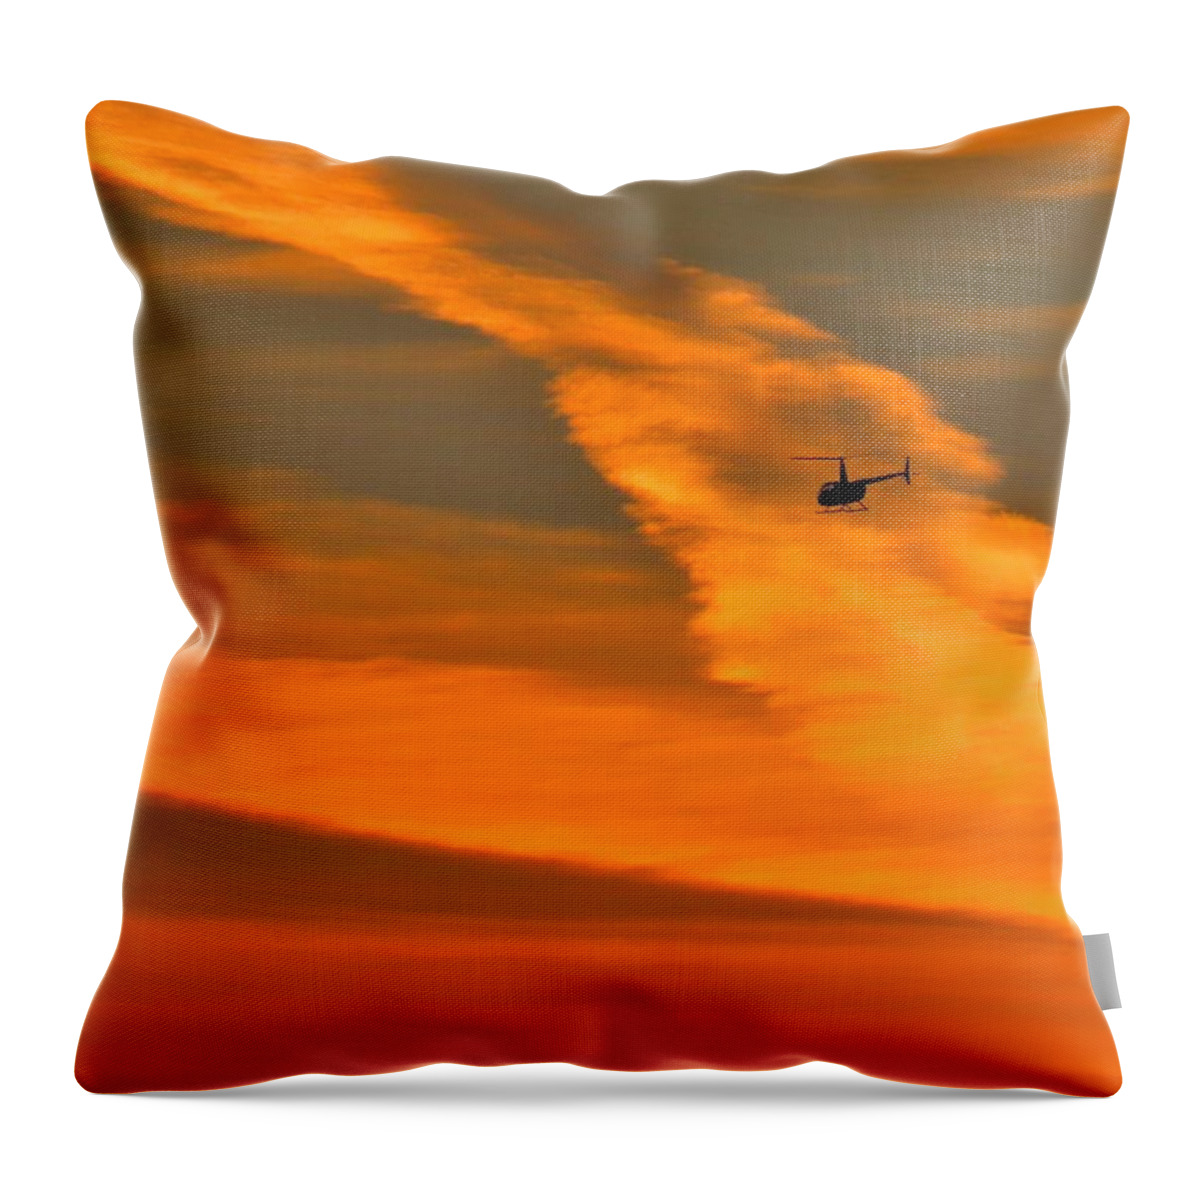 Helicopter Throw Pillow featuring the photograph Helicopter Approaching at Sunset by Linda Stern